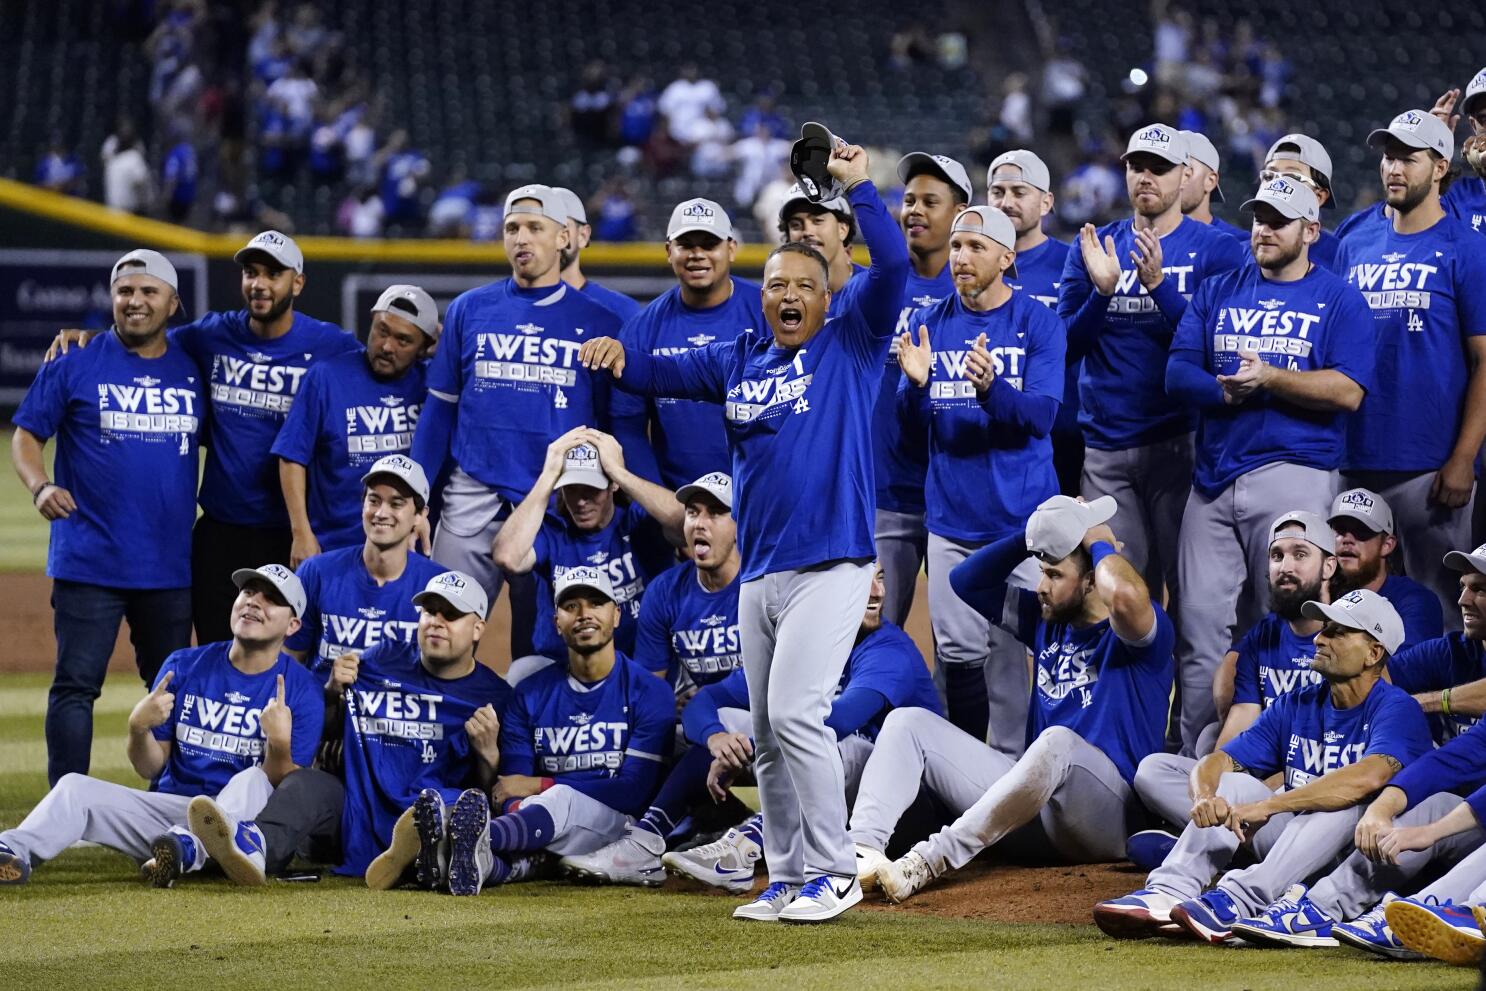 Los Angeles Dodgers 2023 Nl West Division Champions Players Names